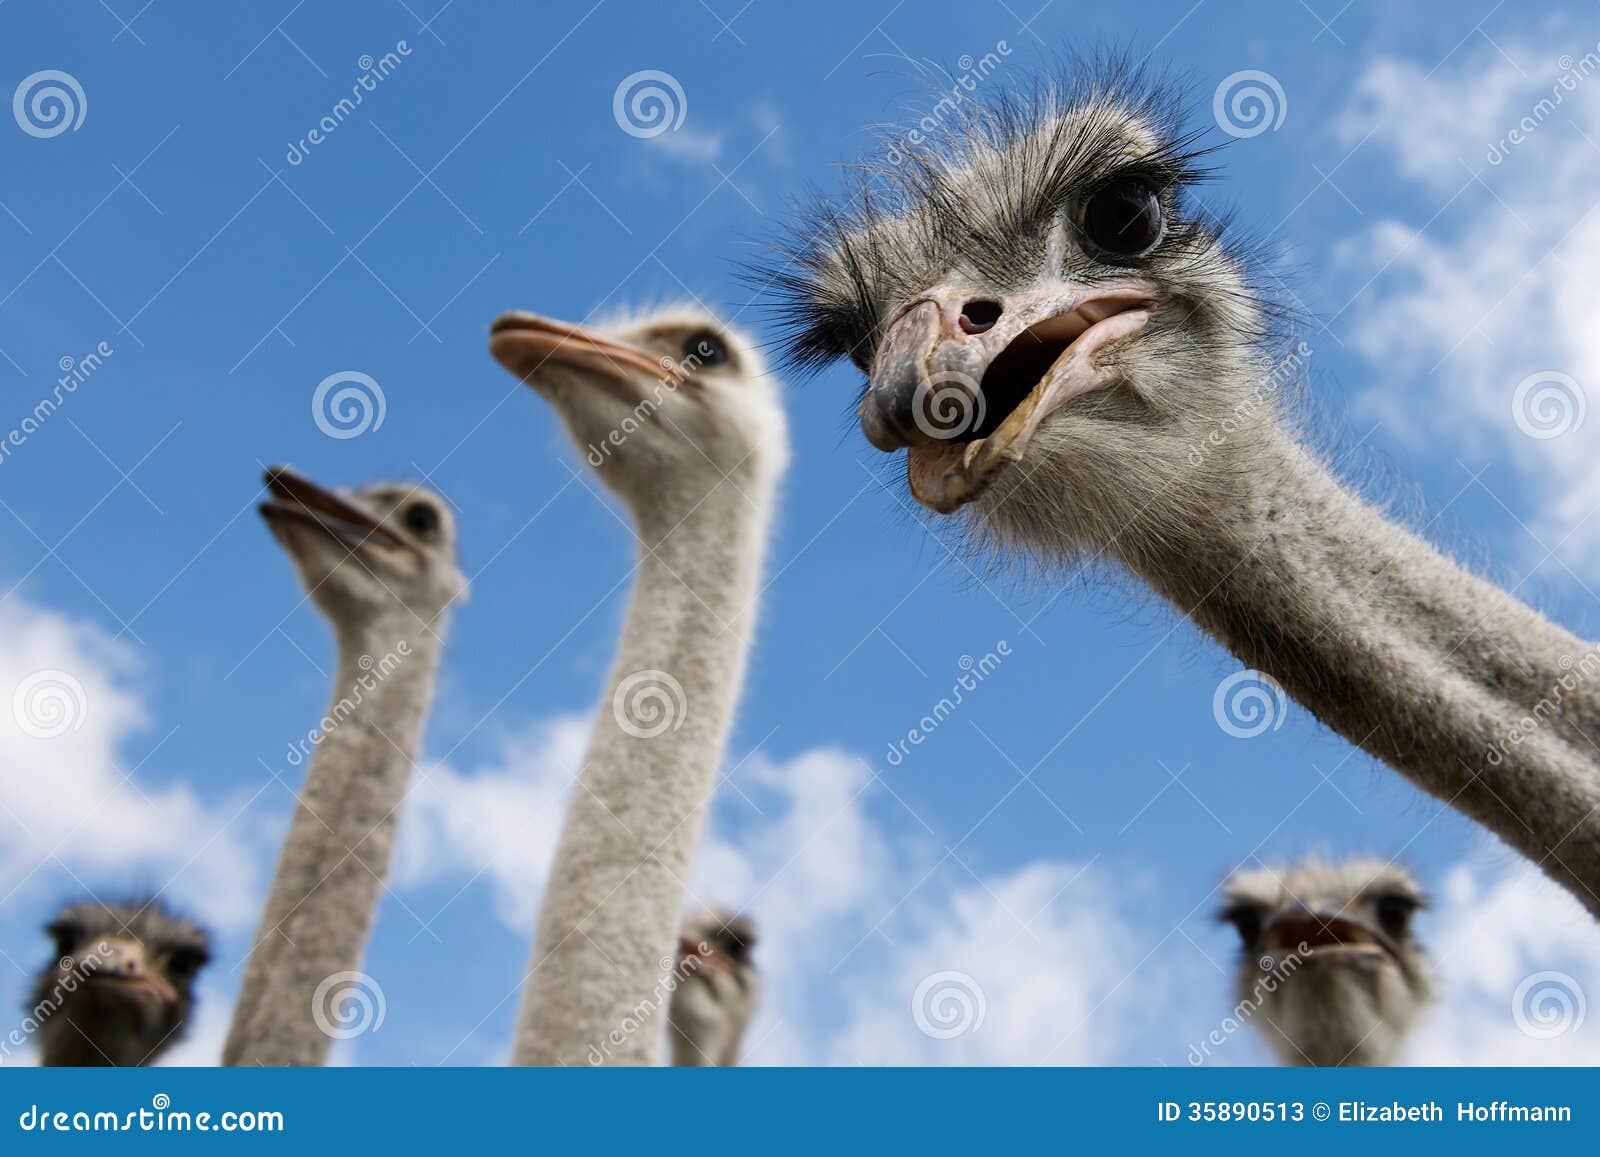 inquisitive ostriches looking at viewer